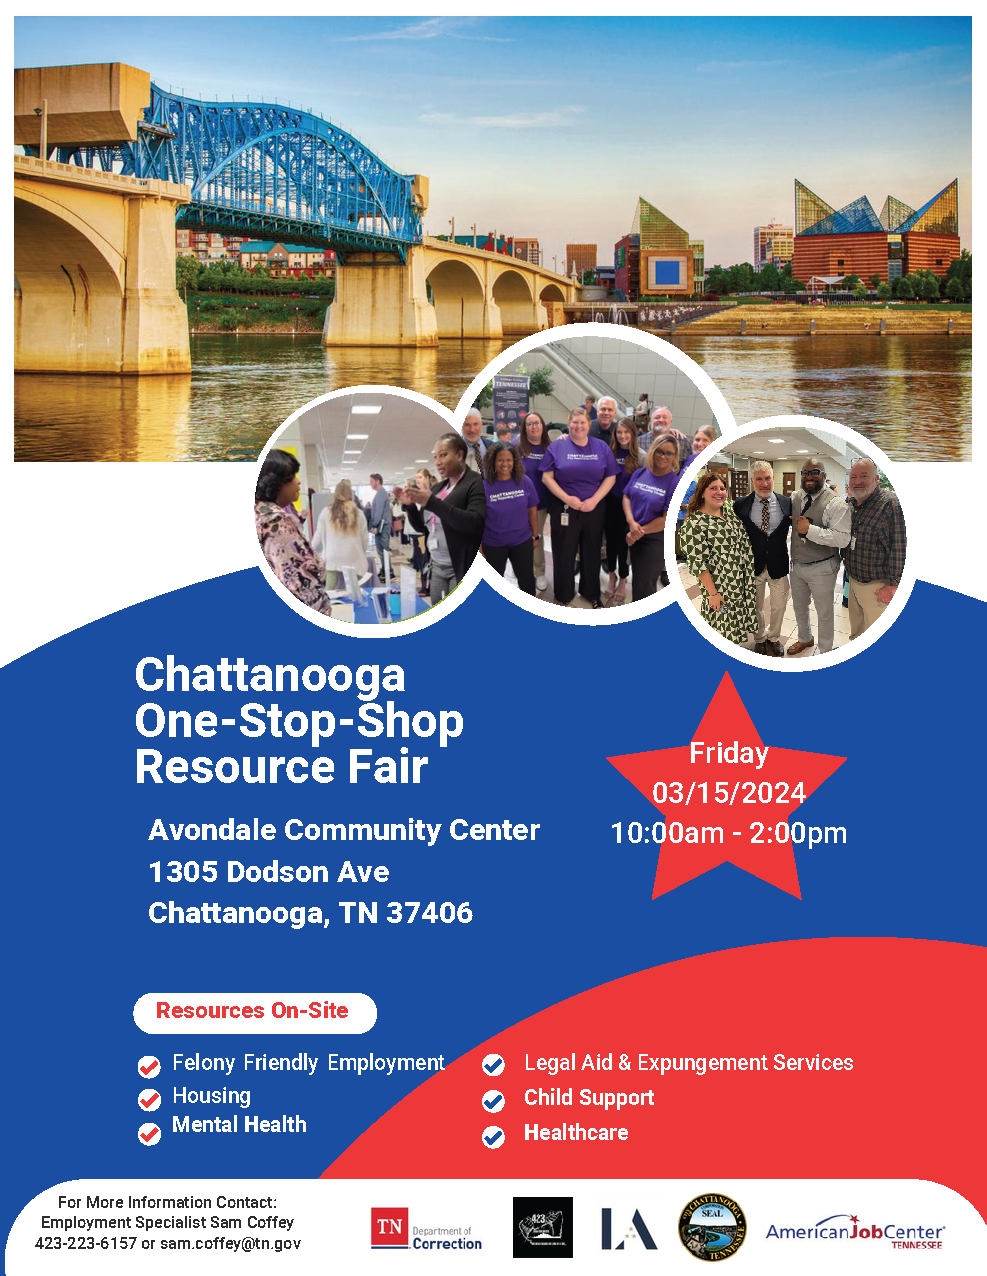 Chattanooga One-Stop-Shop Resource Fair March 15, 2024, from 10 a.m. to 2 p.m. EDT